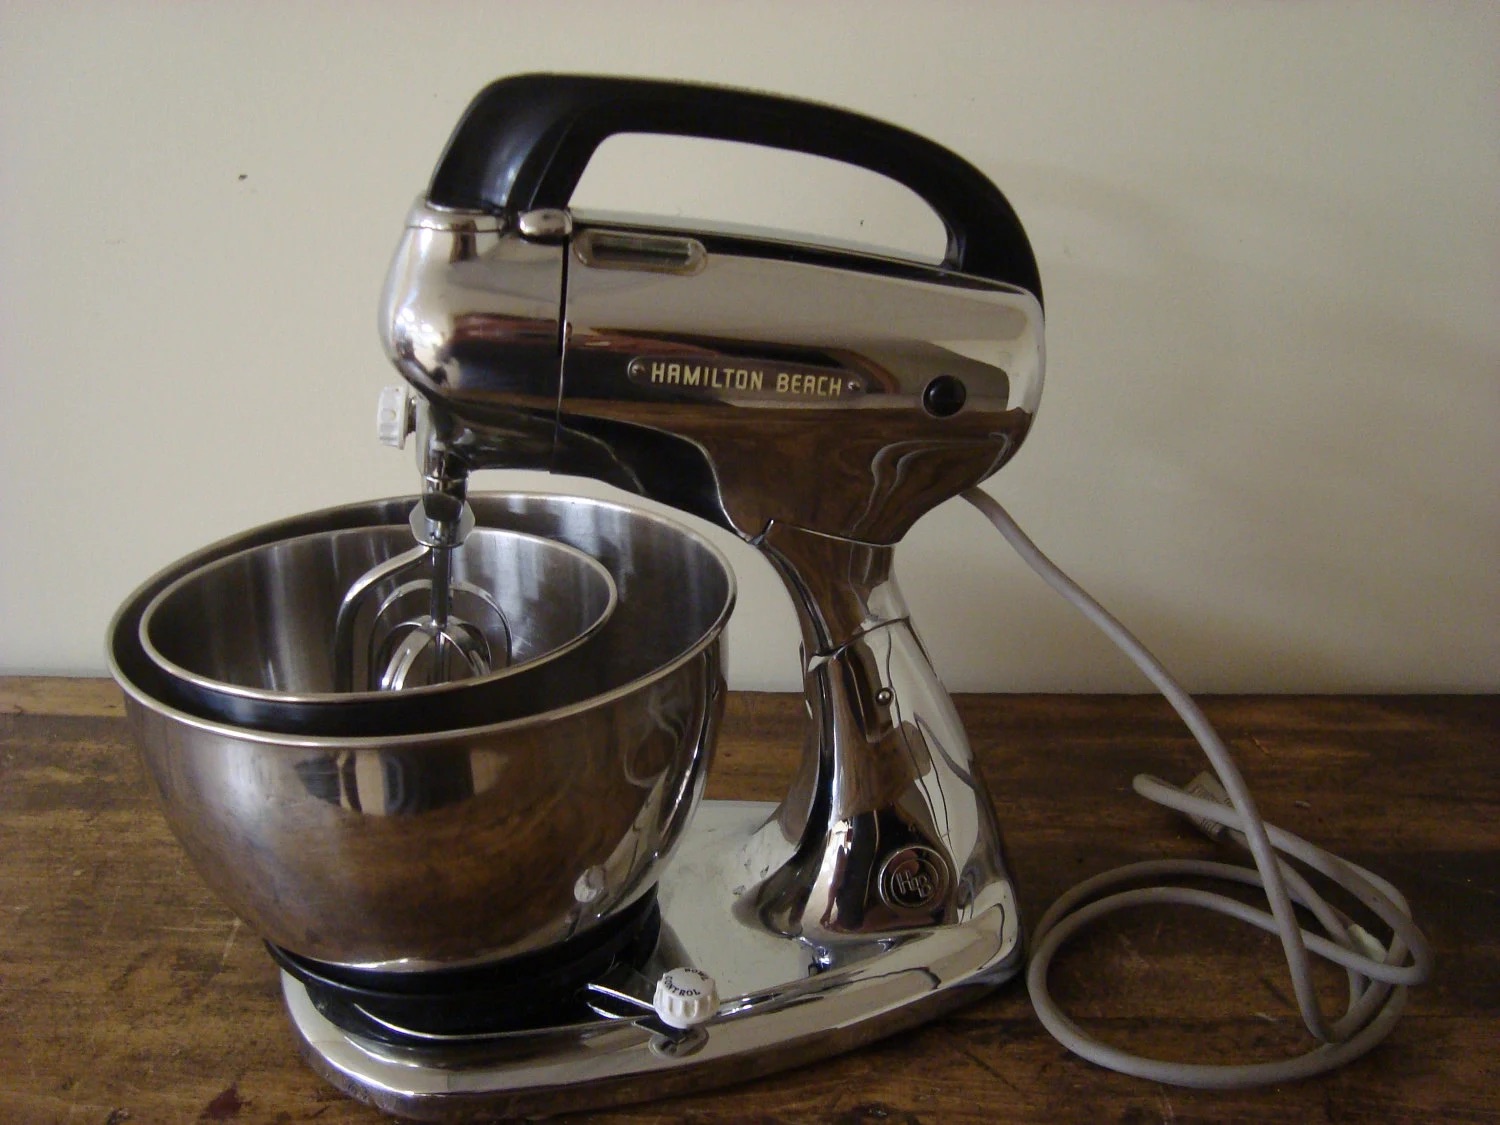 A Well-Seasoned Life: {Review} Hamilton Beach's Stand Mixer